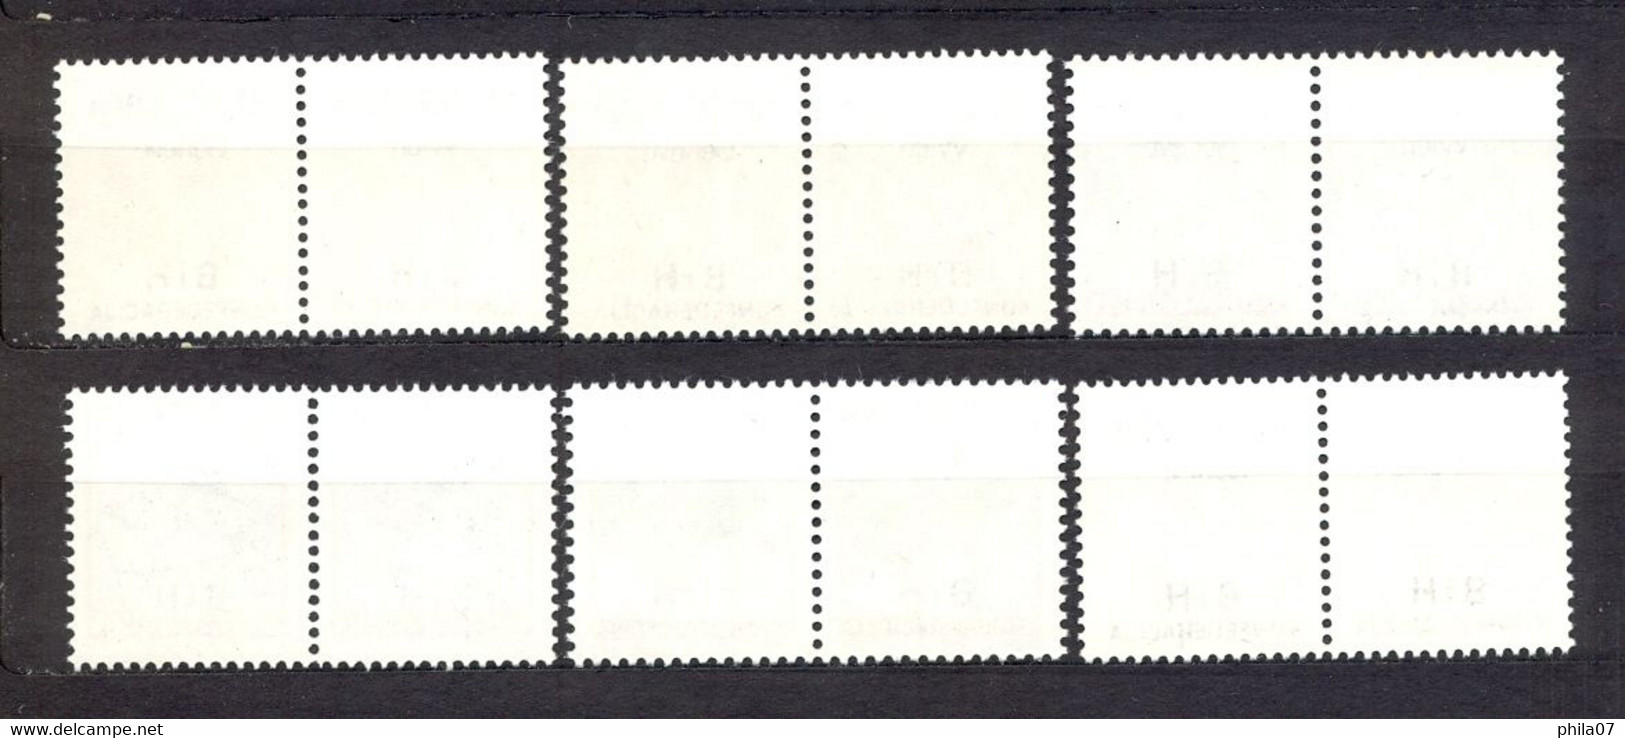 BOSNIA AND HERZEGOVINA War 1991-1995 - Overprint On Stamps Of Yugoslavia In Horizontal Pairs And In Two Type, Private Is - Bosnia And Herzegovina